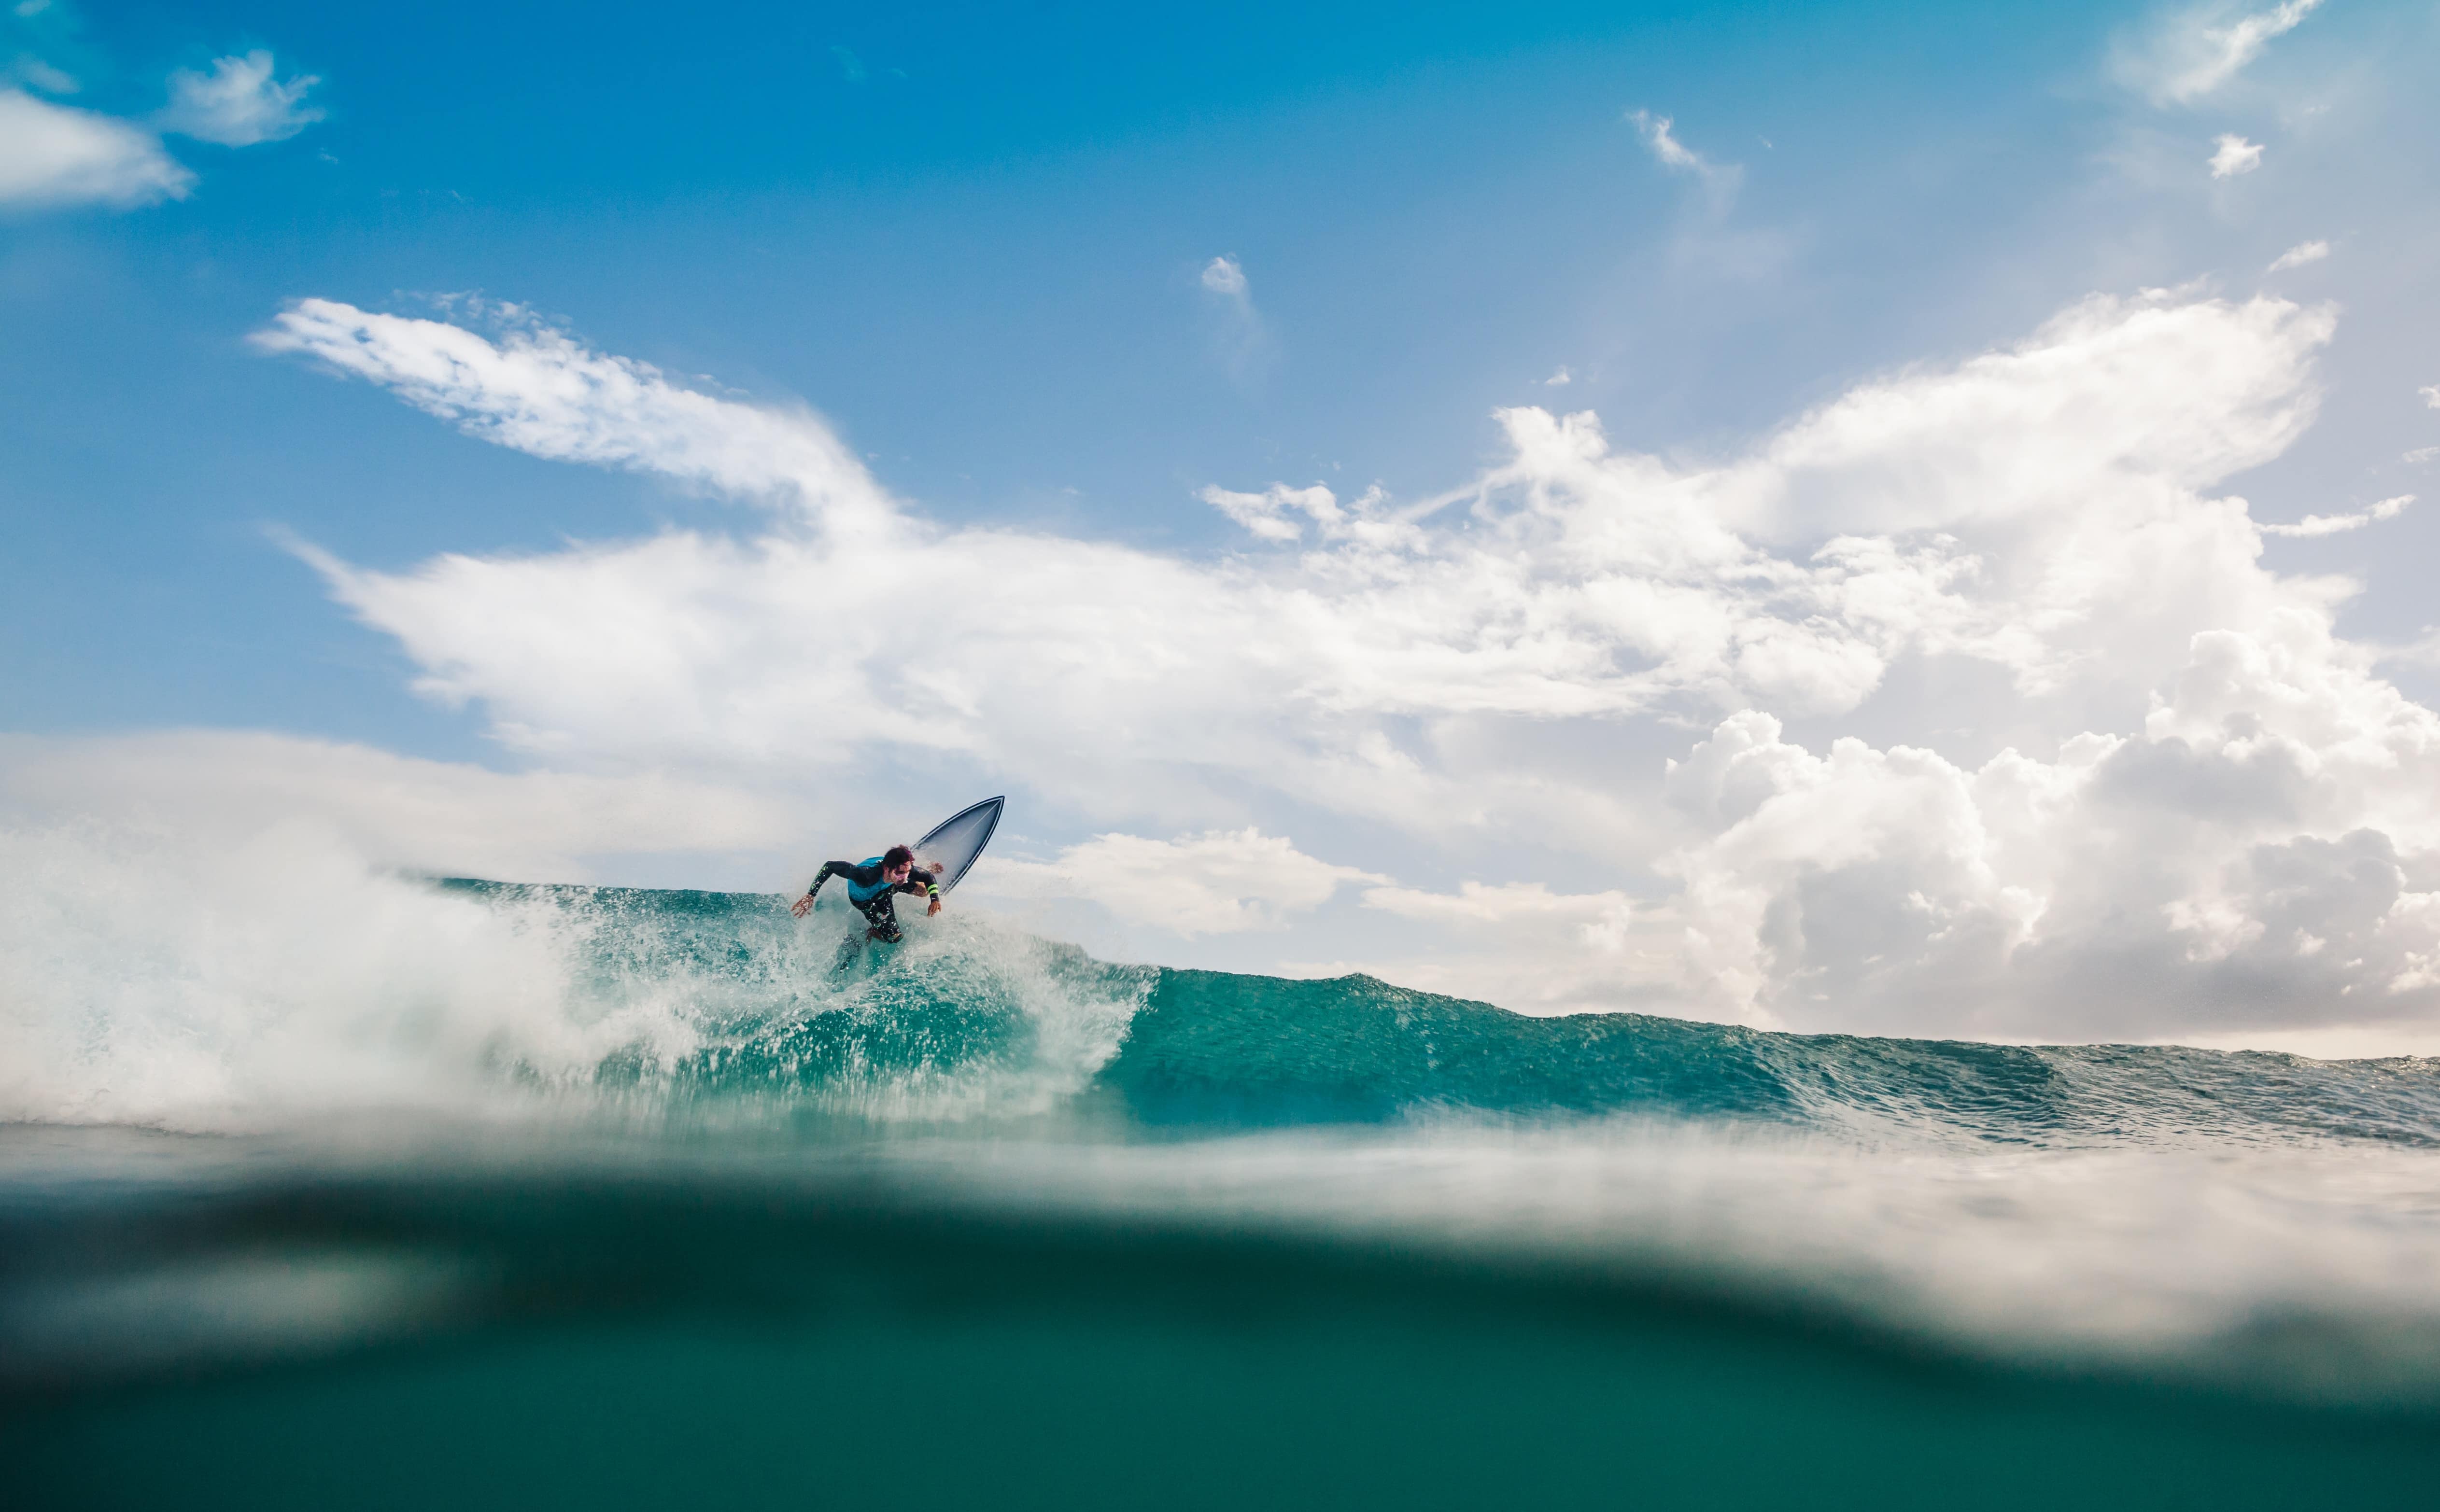 Surfing in Guadeloupe, photo by Cédric Frixon on Unsplash